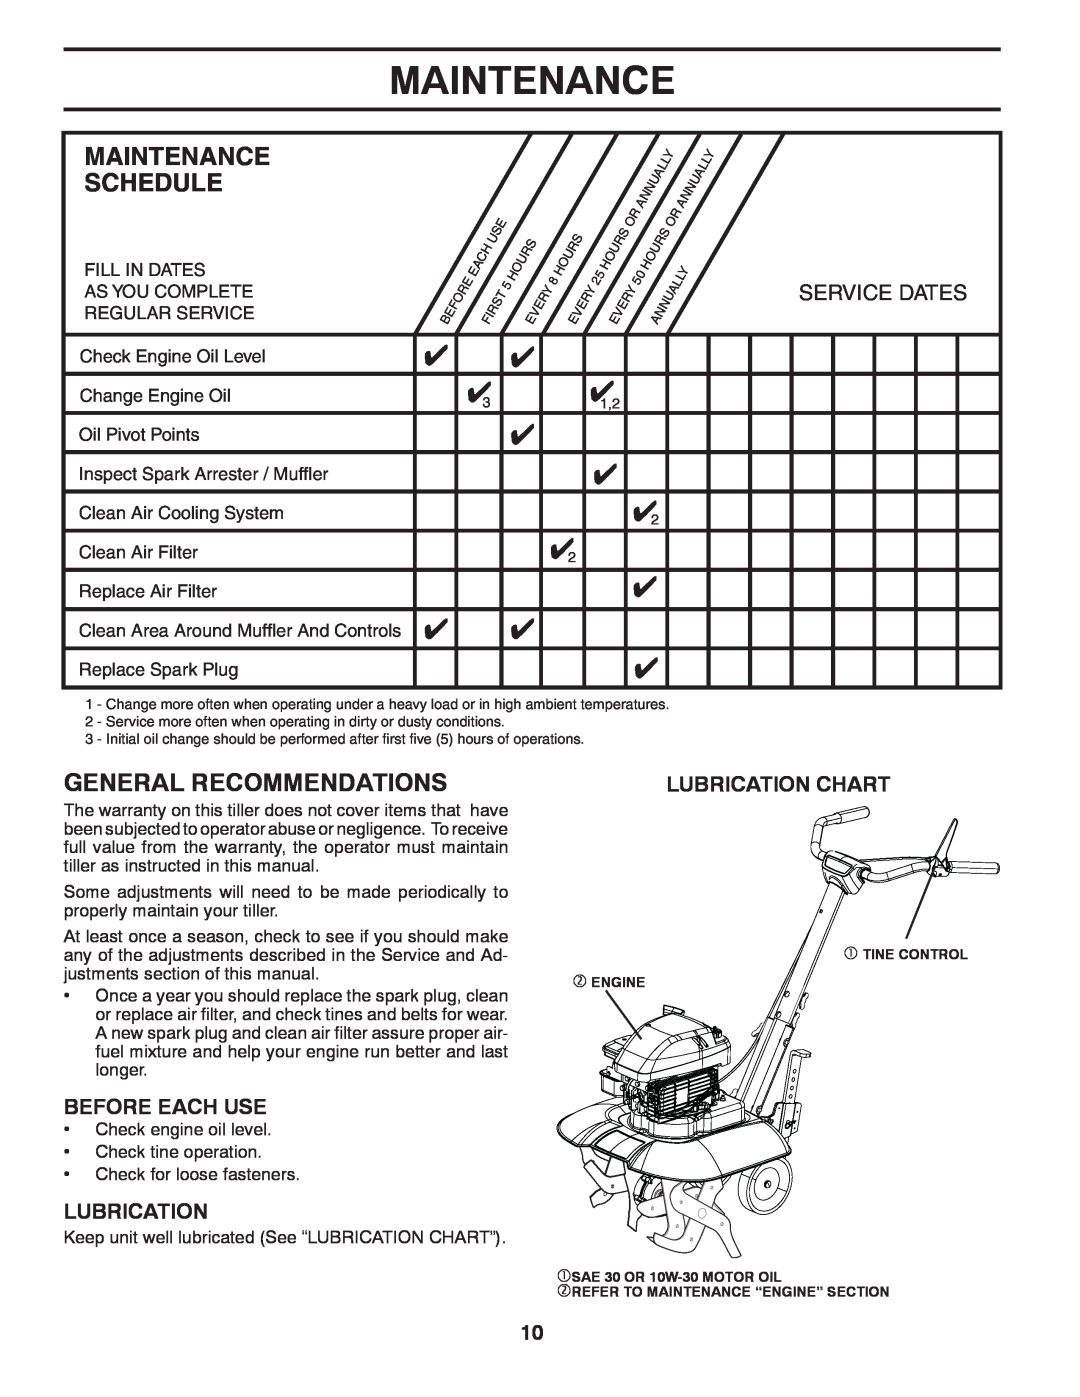 McCulloch MC550 Maintenance Schedule, General Recommendations, Before Each Use, Lubrication Chart, Service Dates 